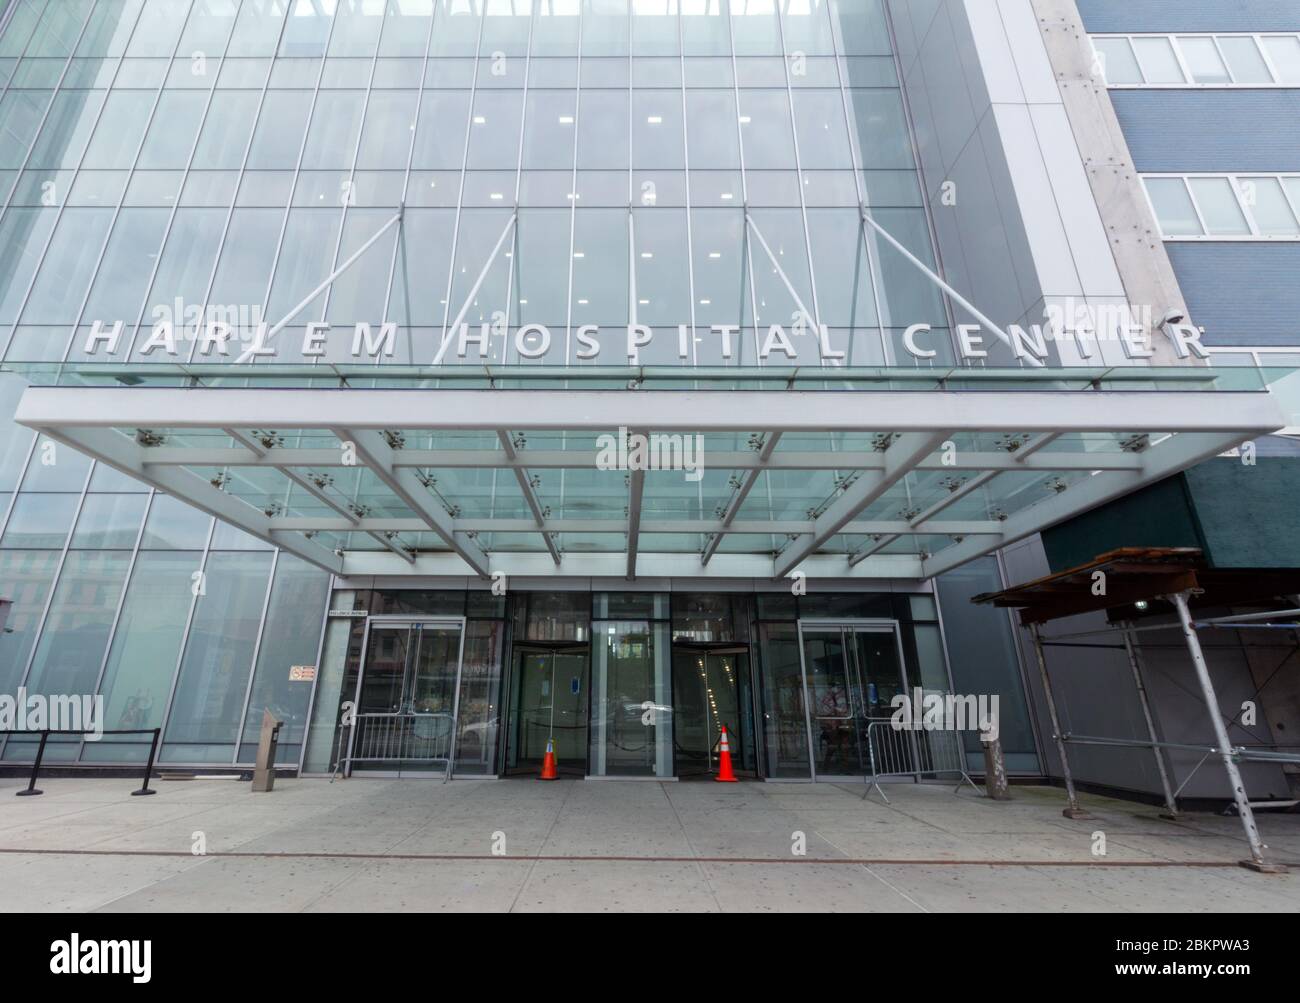 entrance to Harlem Hospital Center, a publicly funded teaching hospital affiliated with Columbia University that serves the Harlem community Stock Photo